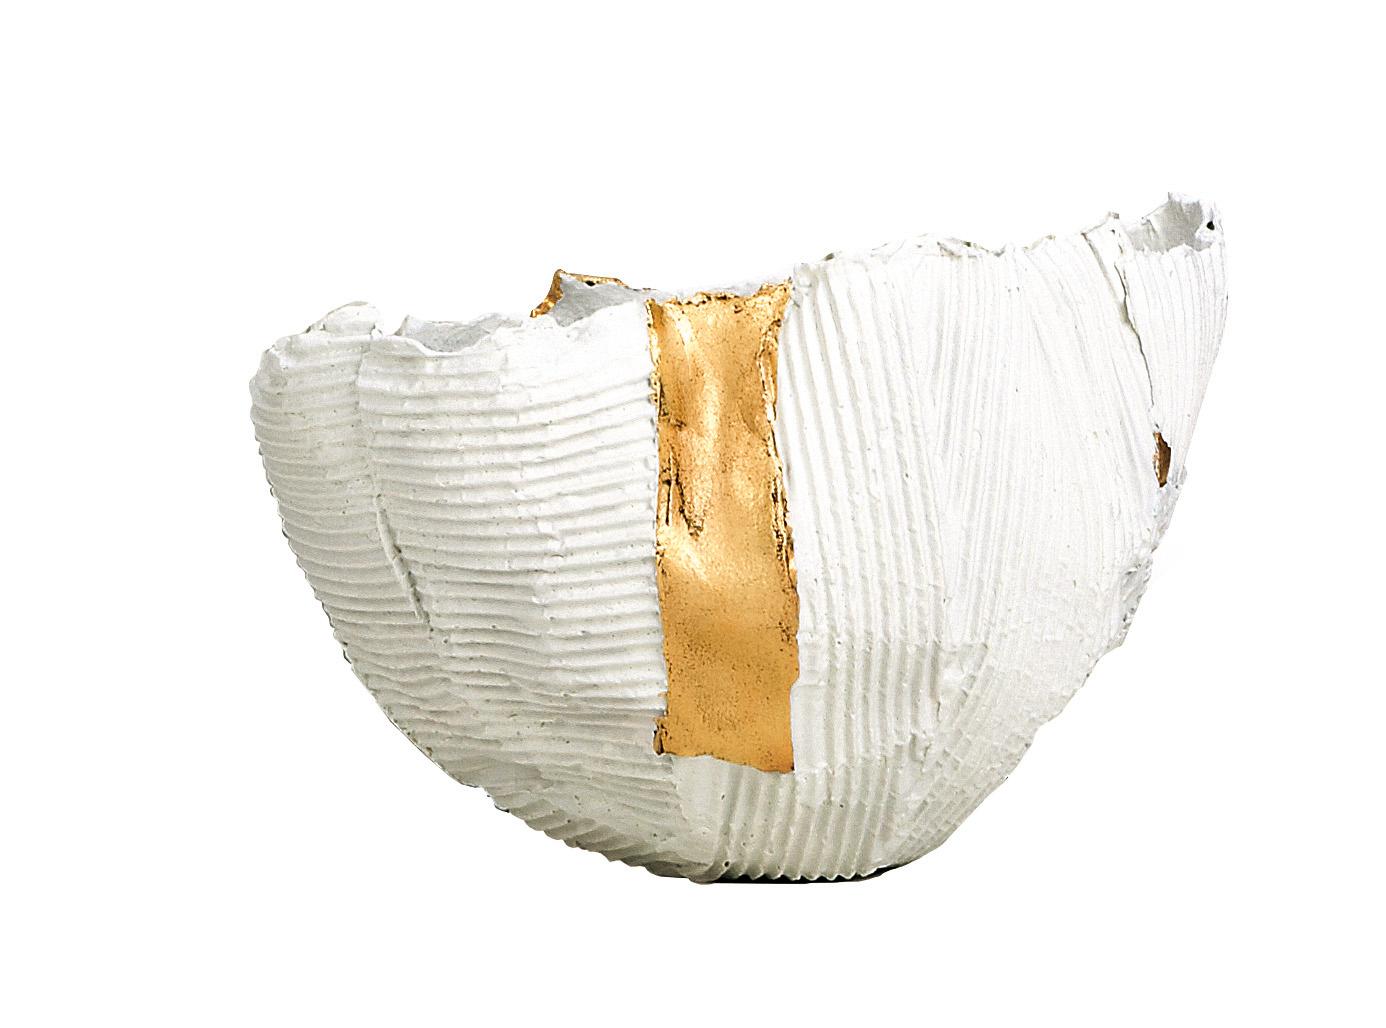 Fashioned entirely by hand, this irregularly shaped bowl will be a timeless centerpiece in a modern dining room, living room, or entryway. Characterized by a unique three-dimensional texture, it features expressive horizontal and vertical ridges and